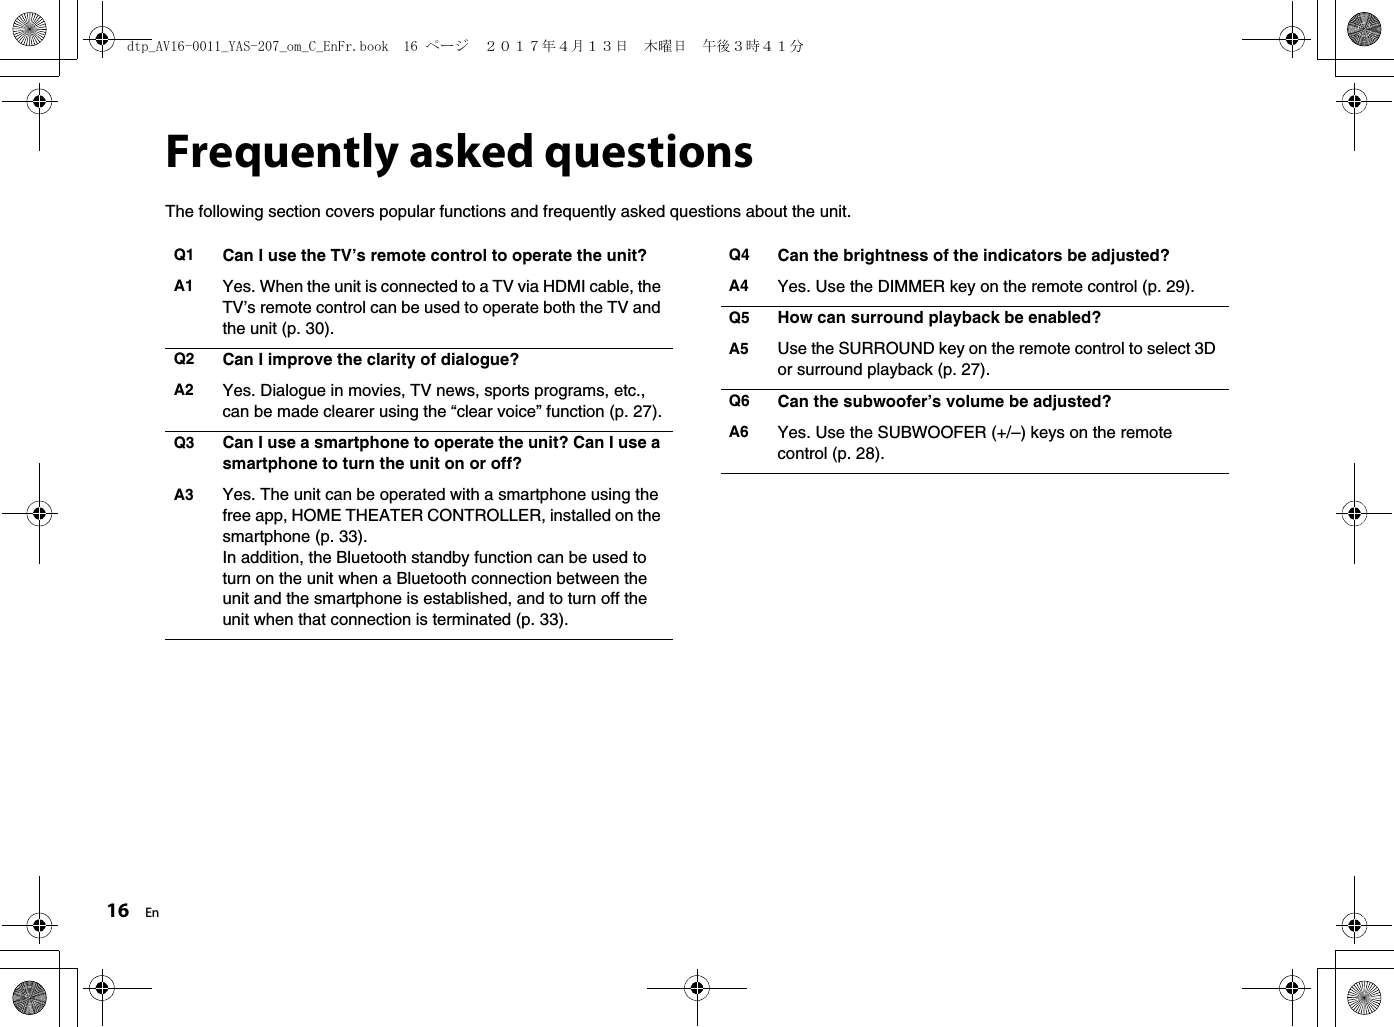 16 EnFrequently asked questionsThe following section covers popular functions and frequently asked questions about the unit.Q1 Can I use the TV’s remote control to operate the unit?A1 Yes. When the unit is connected to a TV via HDMI cable, the TV’s remote control can be used to operate both the TV and the unit (p. 30).Q2 Can I improve the clarity of dialogue?A2 Yes. Dialogue in movies, TV news, sports programs, etc., can be made clearer using the “clear voice” function (p. 27).Q3 Can I use a smartphone to operate the unit? Can I use a smartphone to turn the unit on or off?A3 Yes. The unit can be operated with a smartphone using the free app, HOME THEATER CONTROLLER, installed on the smartphone (p. 33).In addition, the Bluetooth standby function can be used to turn on the unit when a Bluetooth connection between the unit and the smartphone is established, and to turn off the unit when that connection is terminated (p. 33).Q4 Can the brightness of the indicators be adjusted?A4 Yes. Use the DIMMER key on the remote control (p. 29).Q5 How can surround playback be enabled?A5 Use the SURROUND key on the remote control to select 3D or surround playback (p. 27).Q6 Can the subwoofer’s volume be adjusted?A6 Yes. Use the SUBWOOFER (+/–) keys on the remote control (p. 28).dtp_AV16-0011_YAS-207_om_C_EnFr.book  16 ページ  ２０１７年４月１３日　木曜日　午後３時４１分